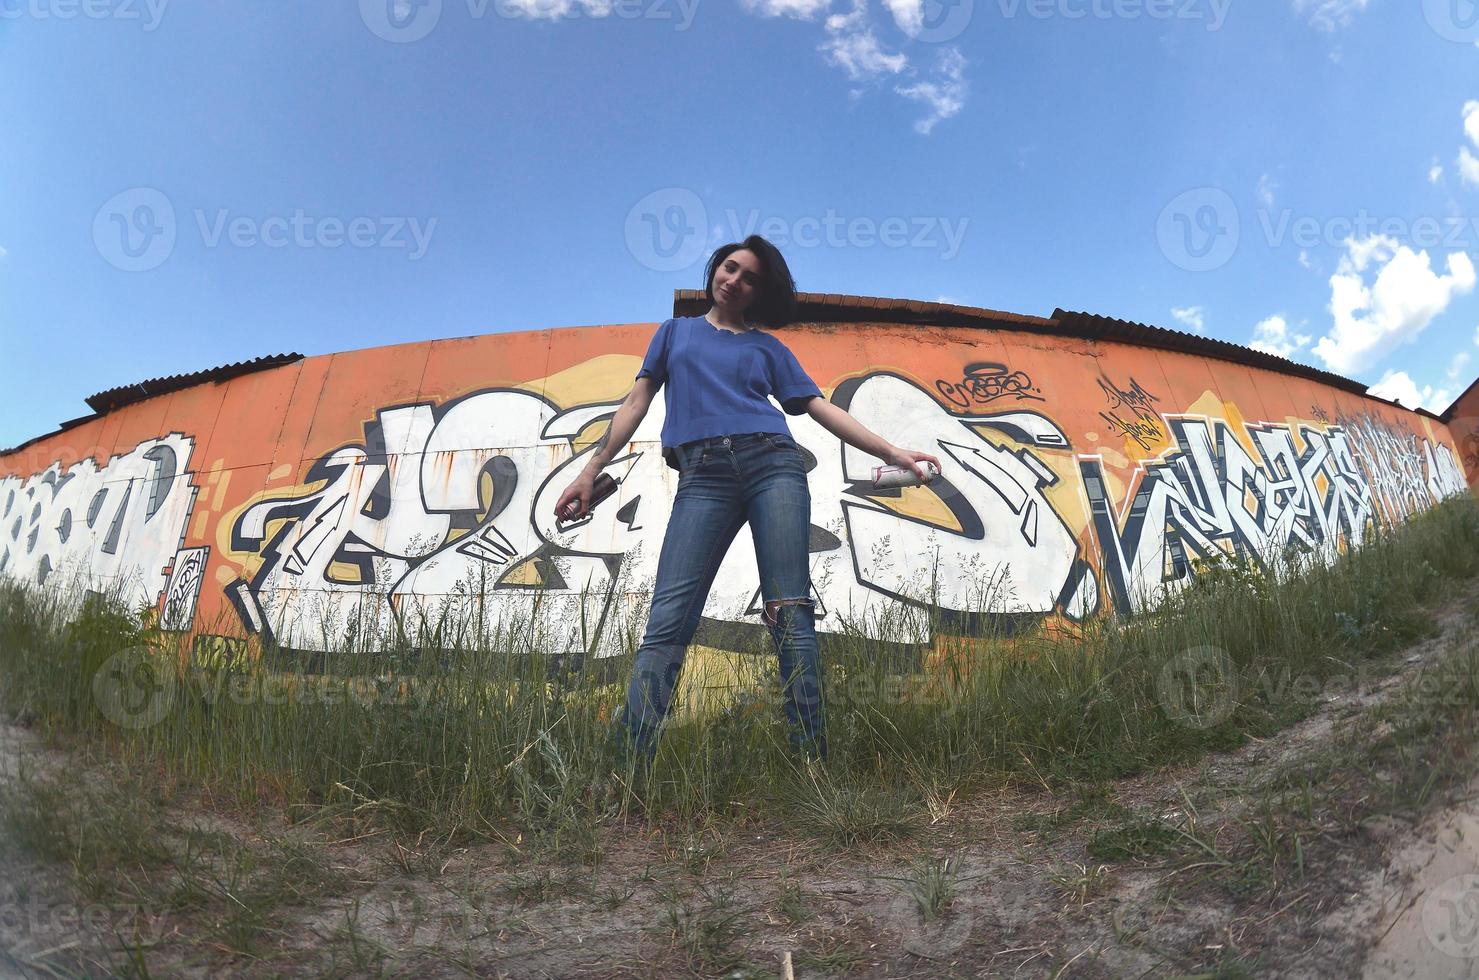 Portrait of an emotional young girl with black hair and piercings. A wide-angle photo of a girl with aerosol paint cans in the hands on a graffiti wall background. A modern portrait of a fisheye lens